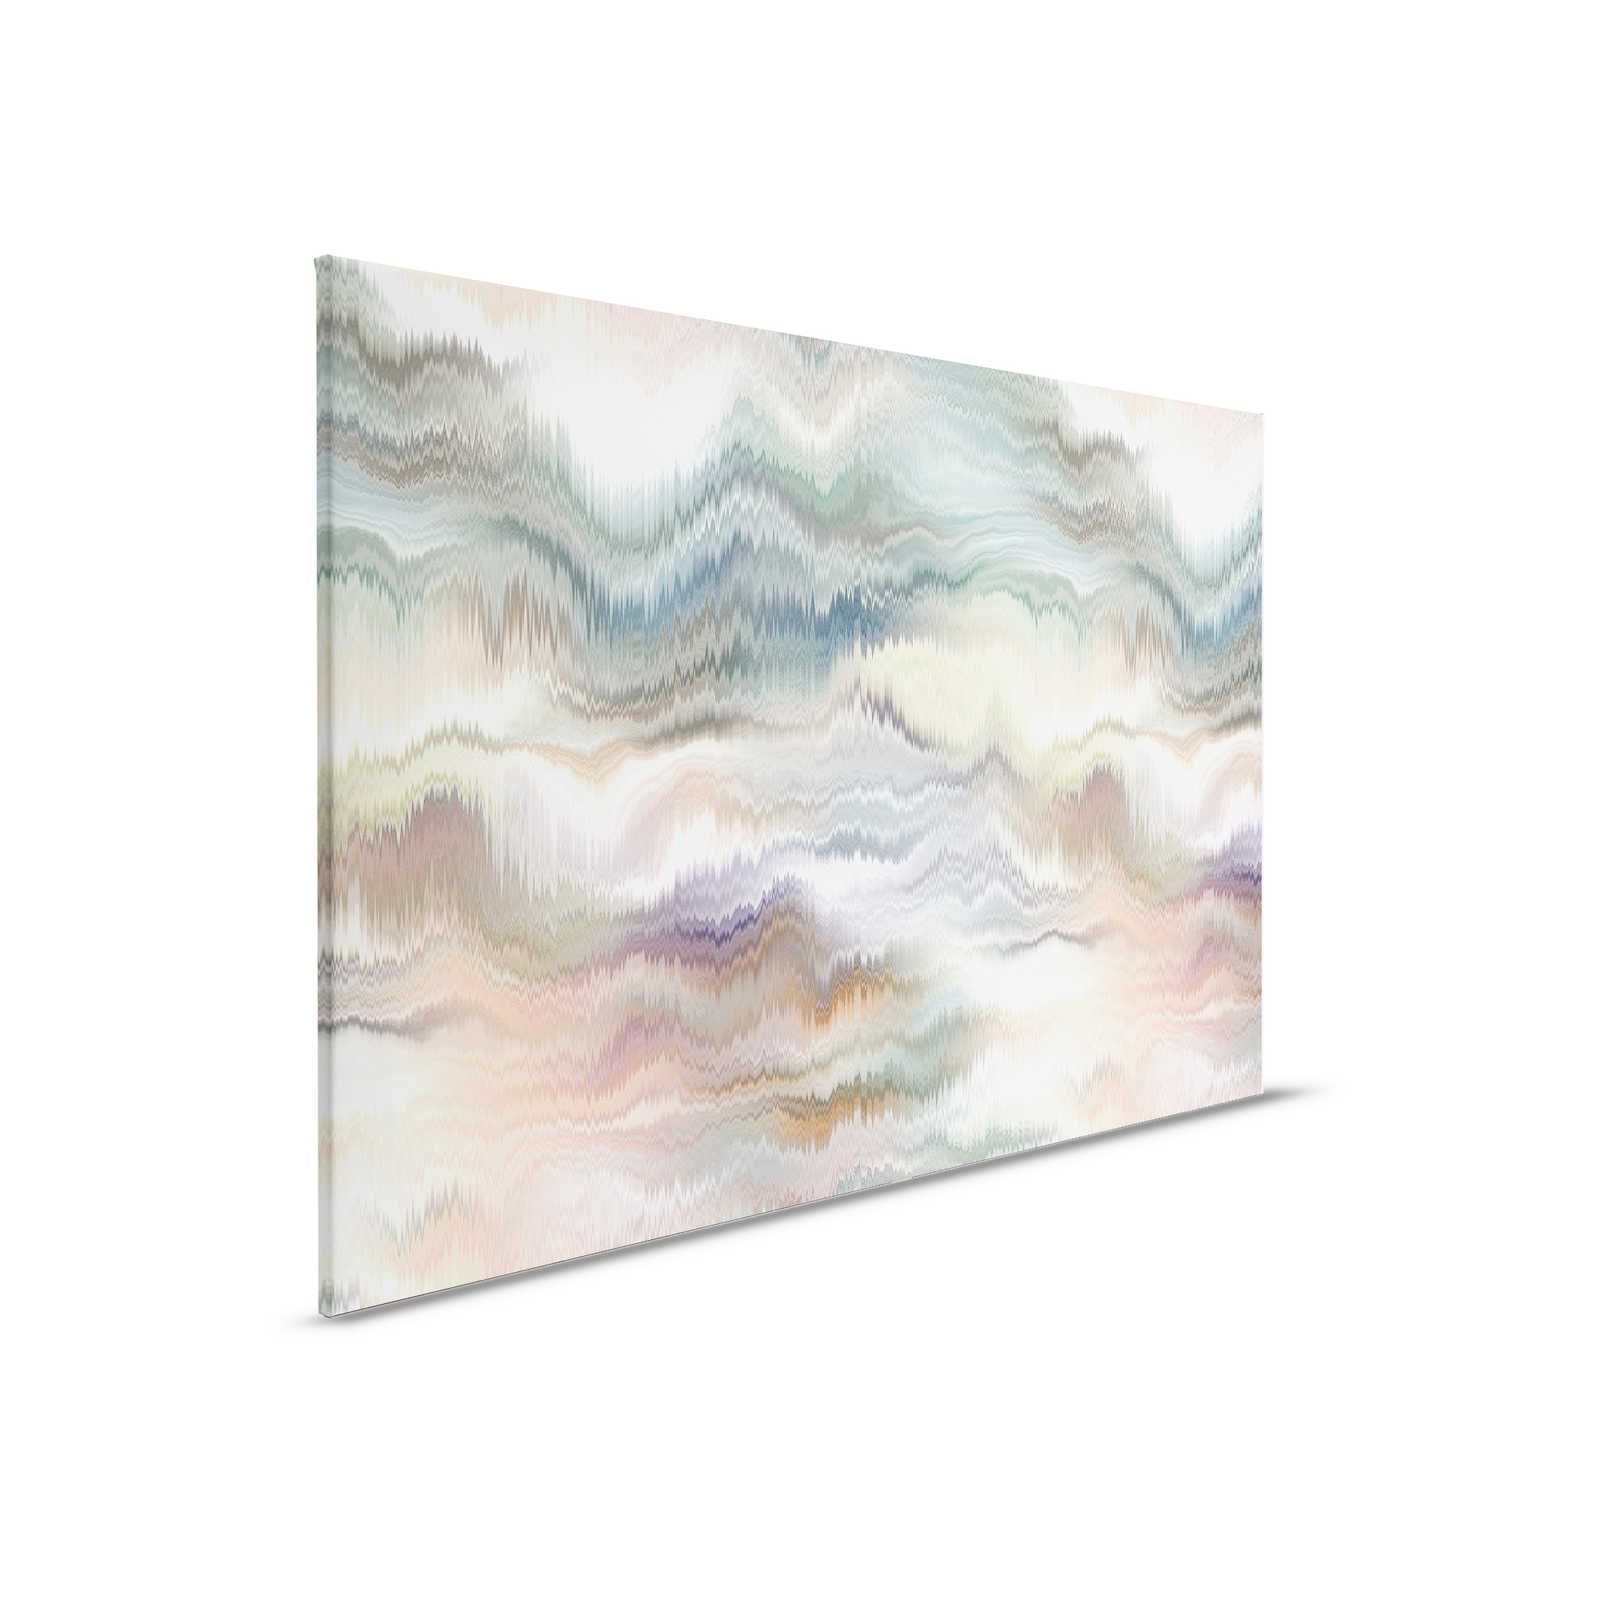         Pastel Palace 2 - Colourful Canvas Painting Pastel Colours & Abstract Pattern - 0.90 m x 0.60 m
    